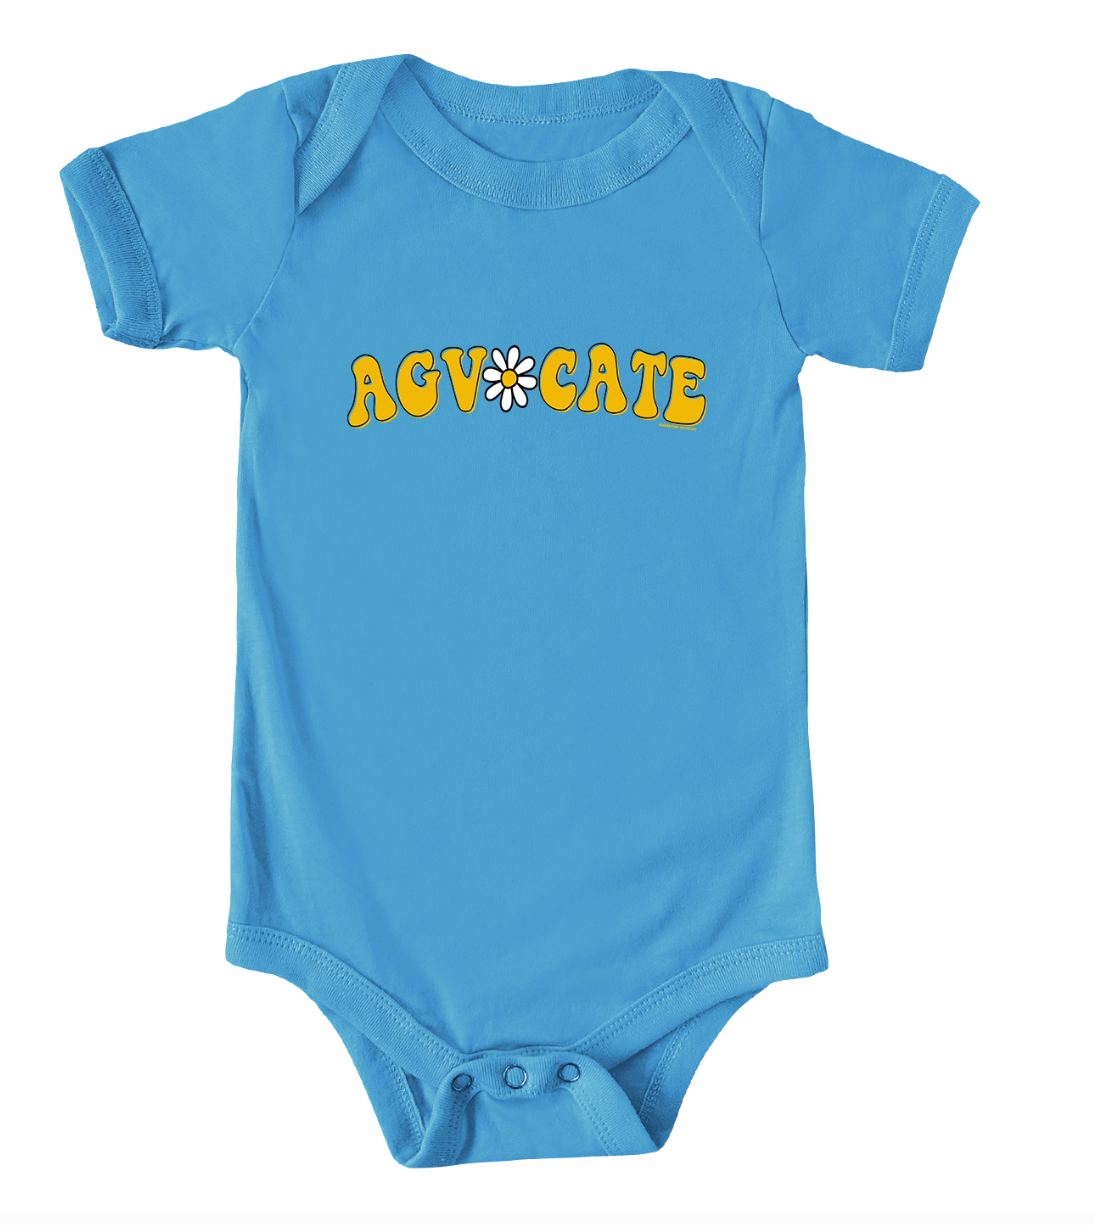 Daisy Agvocate One Piece/T-Shirt (Newborn - Youth XL) - Multiple Colors!